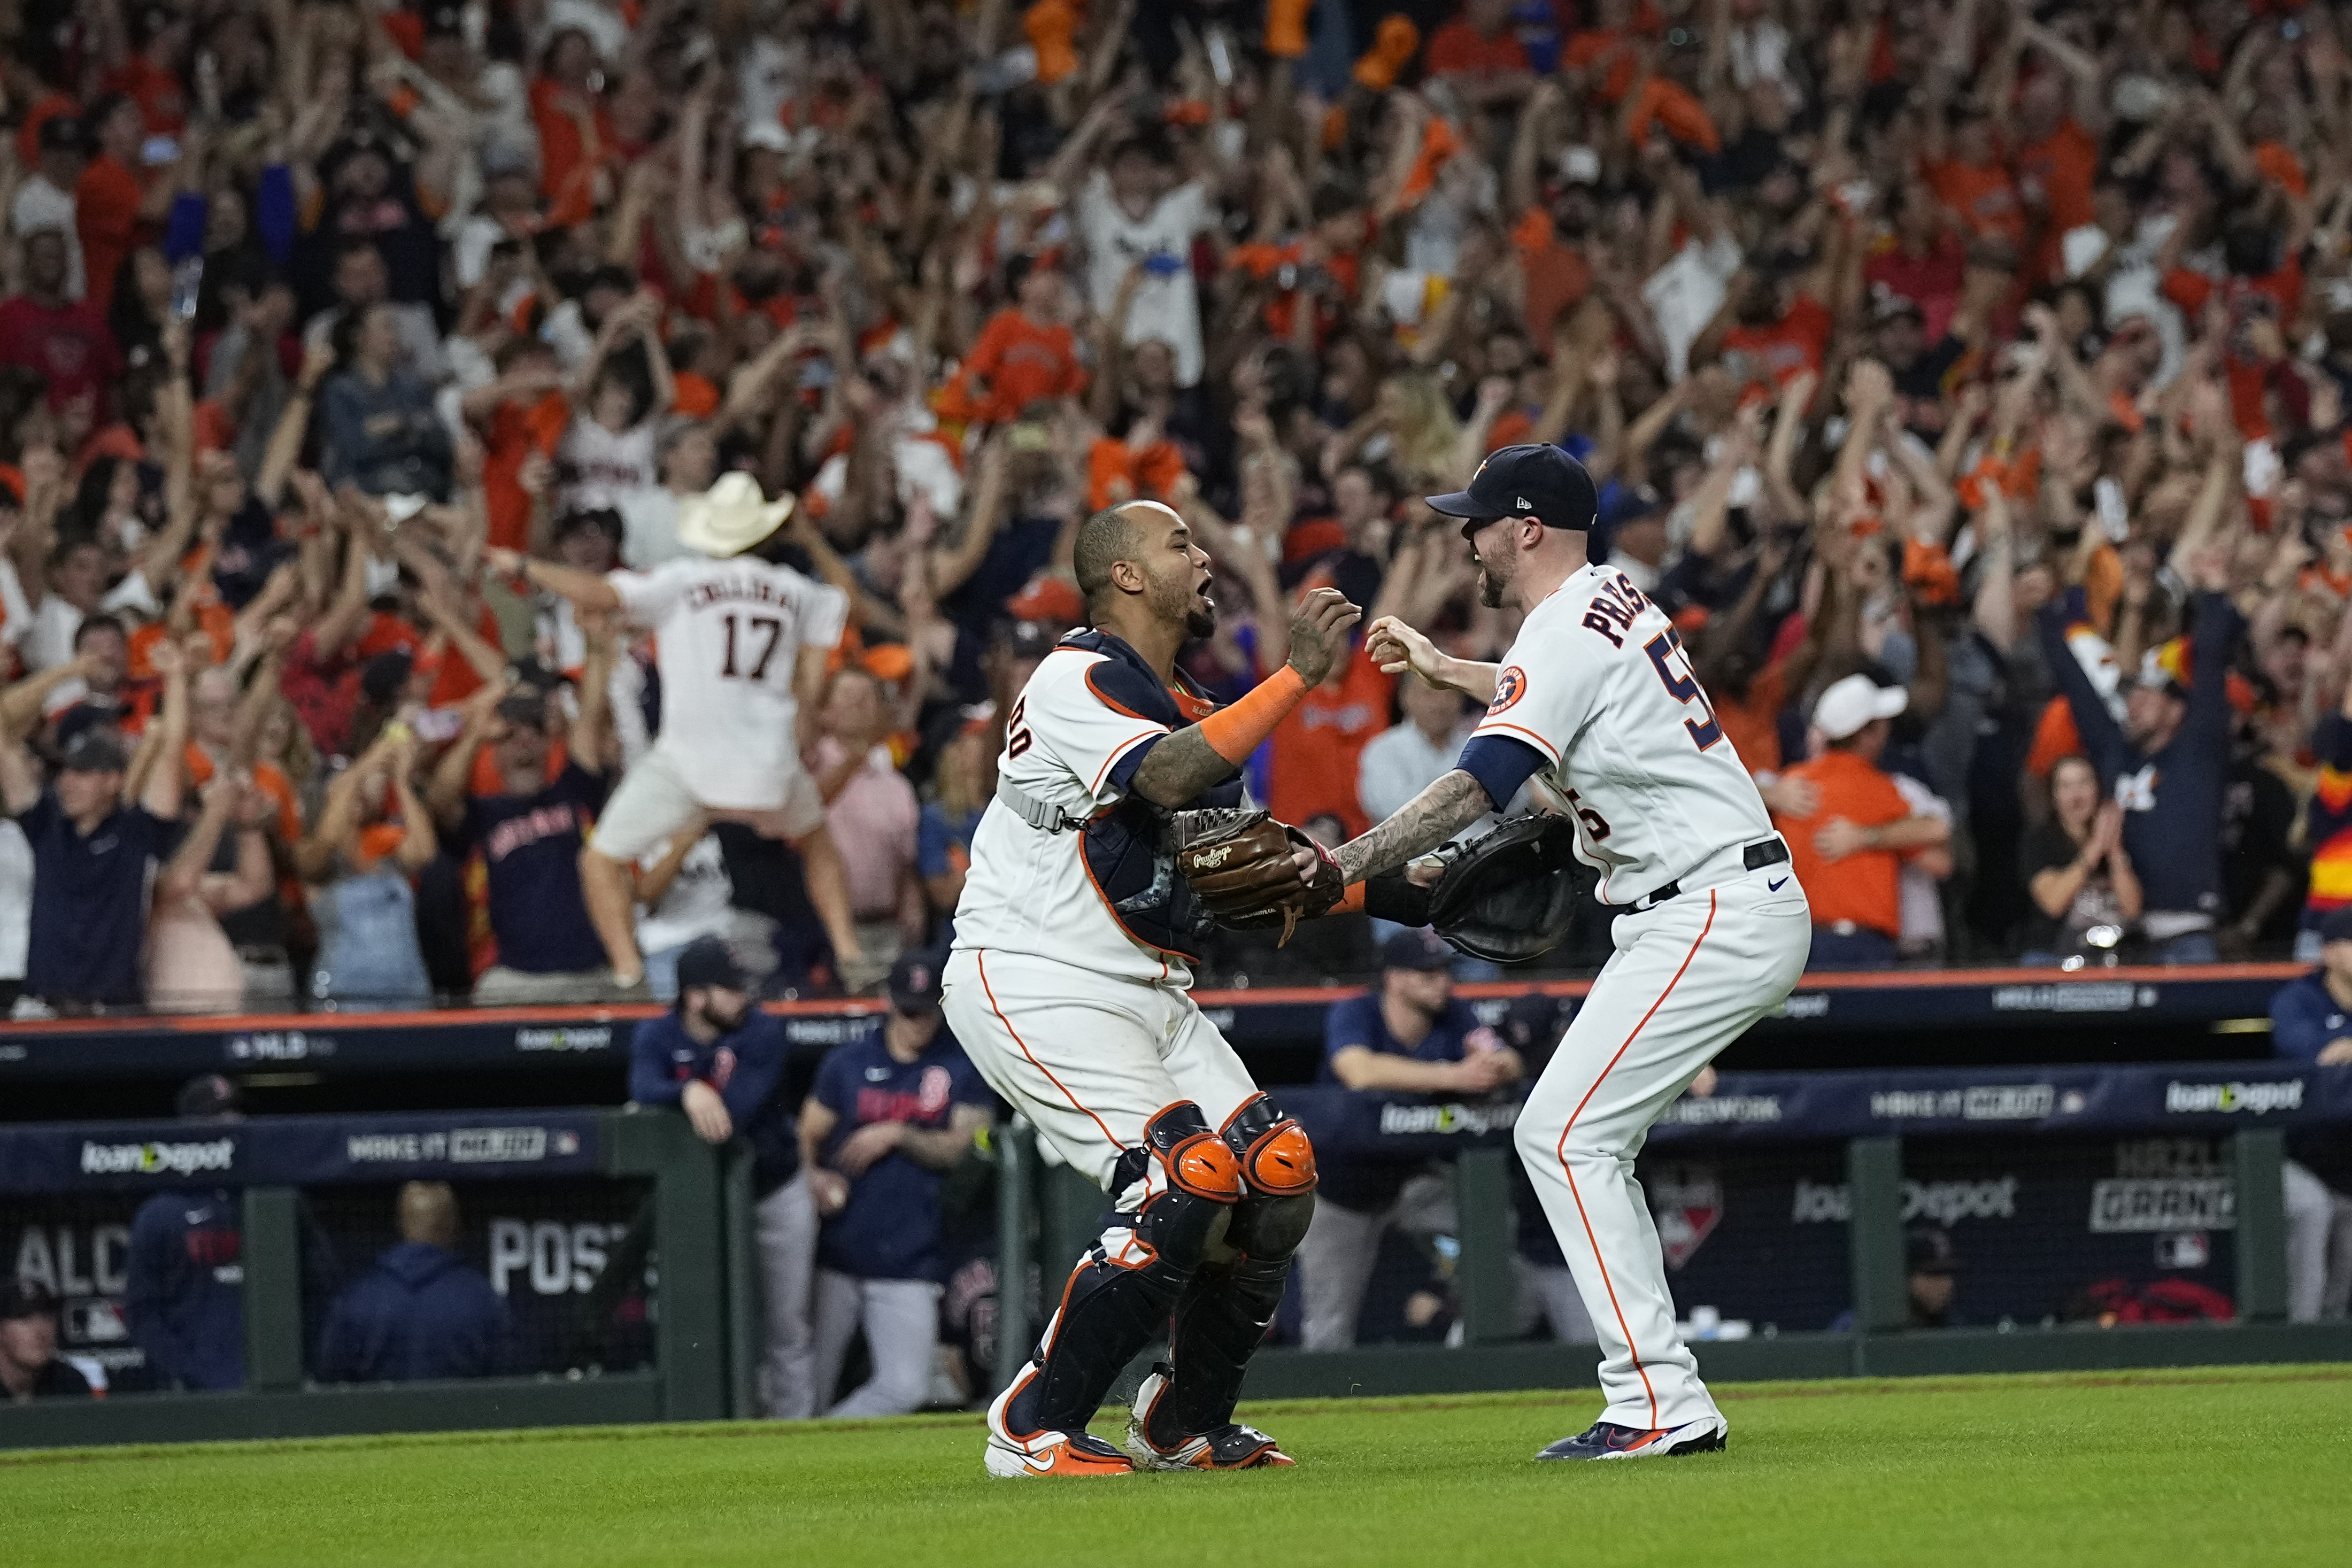 Congrats Astros, Houston Astros, Houston, Let's Go 'Stros! ⚾  Congratulations to the Houston Astros™ for winning the ALCS™ and advancing  to the World Series™. Get your gear online now here